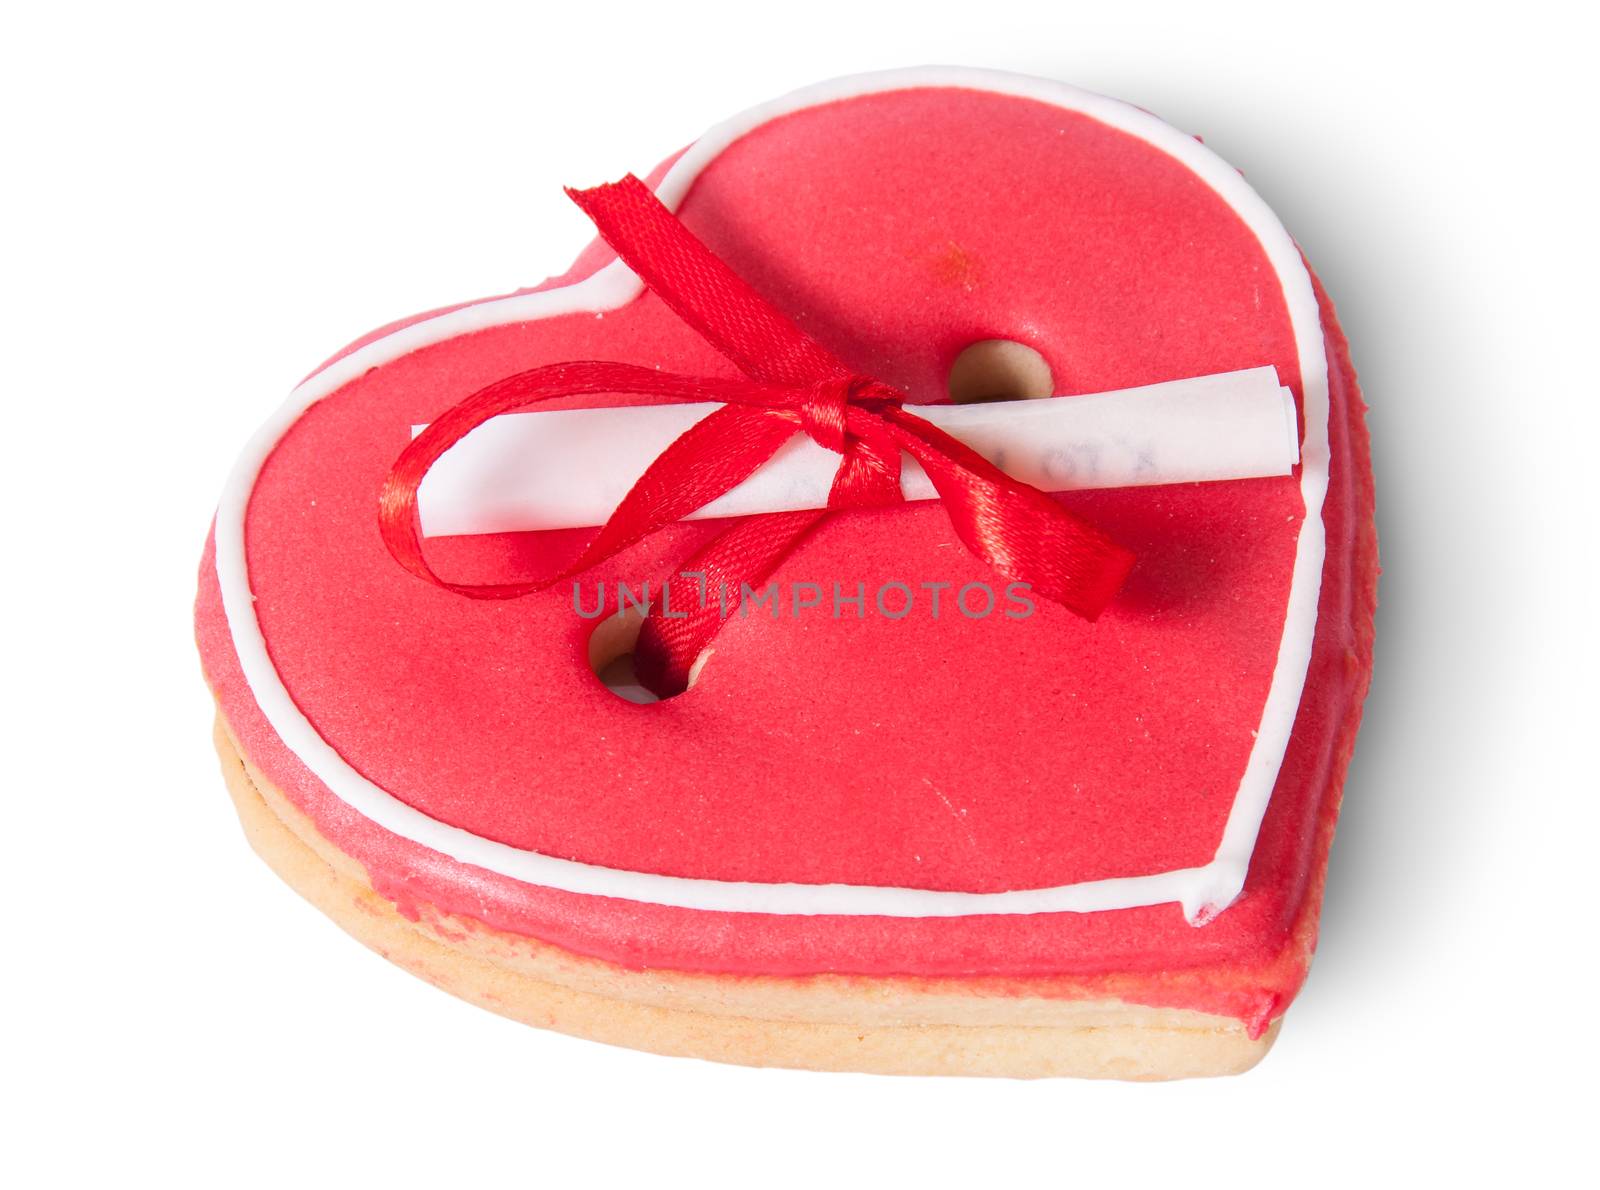 Cookies heart with note by Cipariss